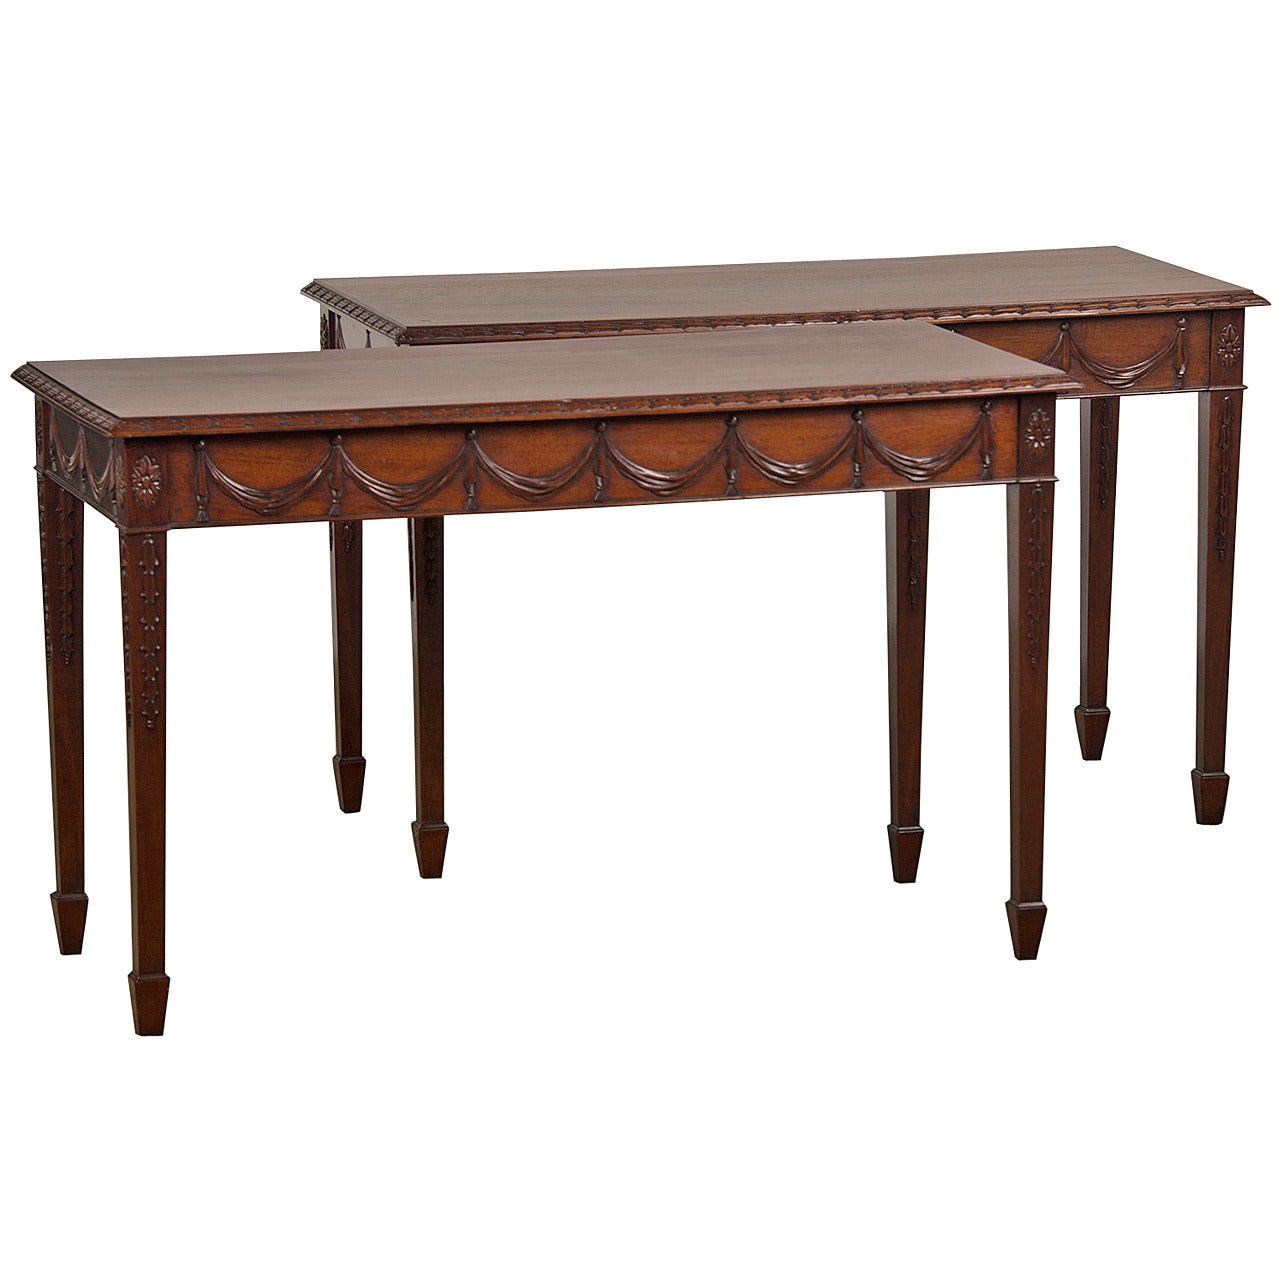 Pair of Adam Style Carved Mahogany Console / Serving Tables, England, circa 1850